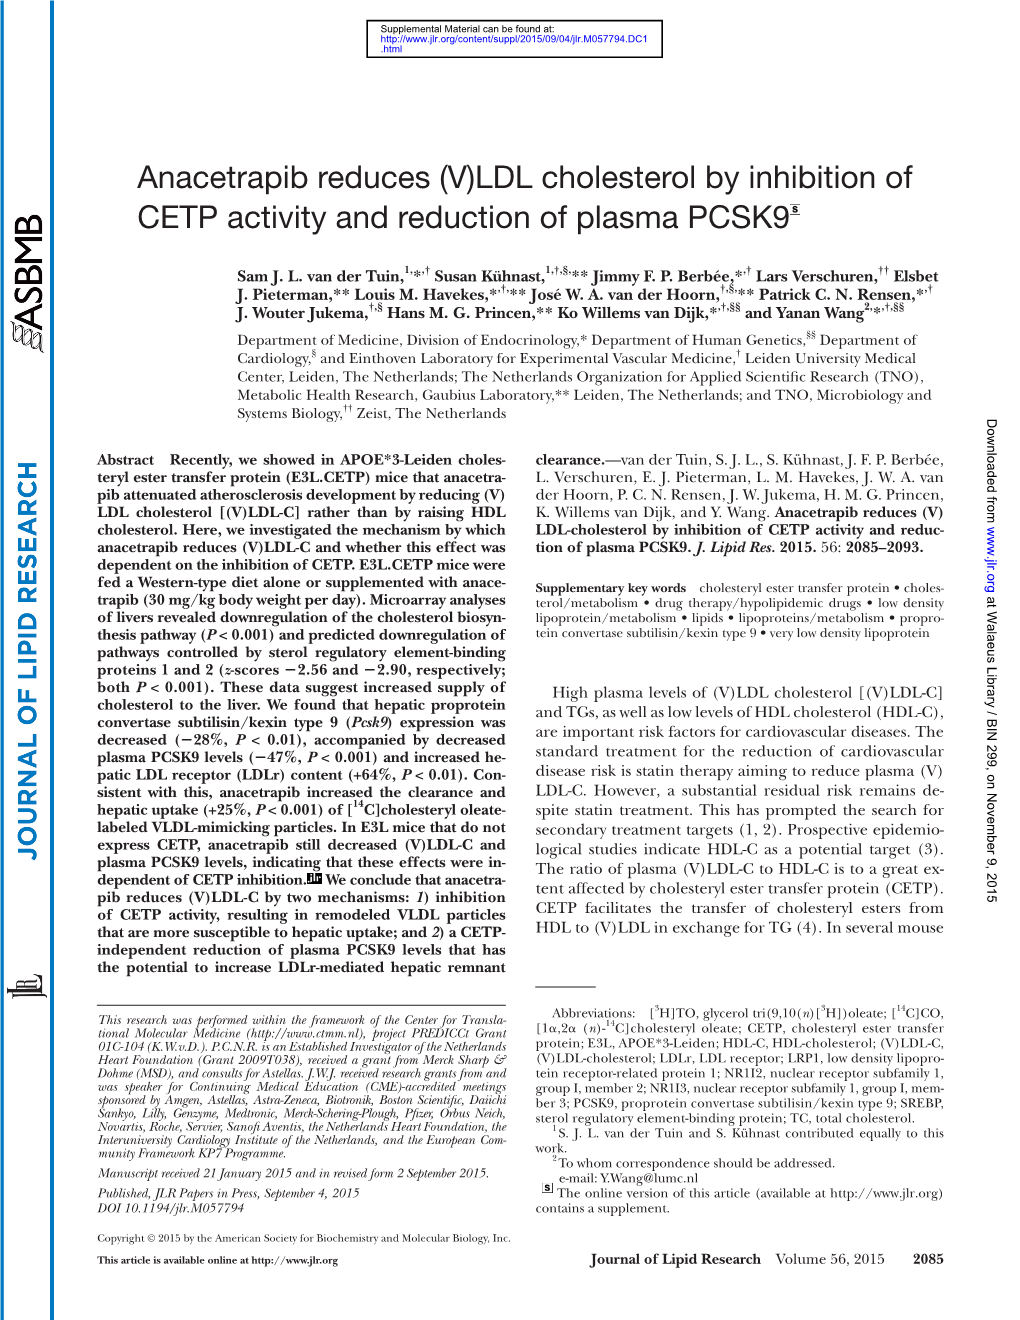 Anacetrapib Reduces (V)LDL Cholesterol by Inhibition of CETP Activity and Reduction of Plasma PCSK9